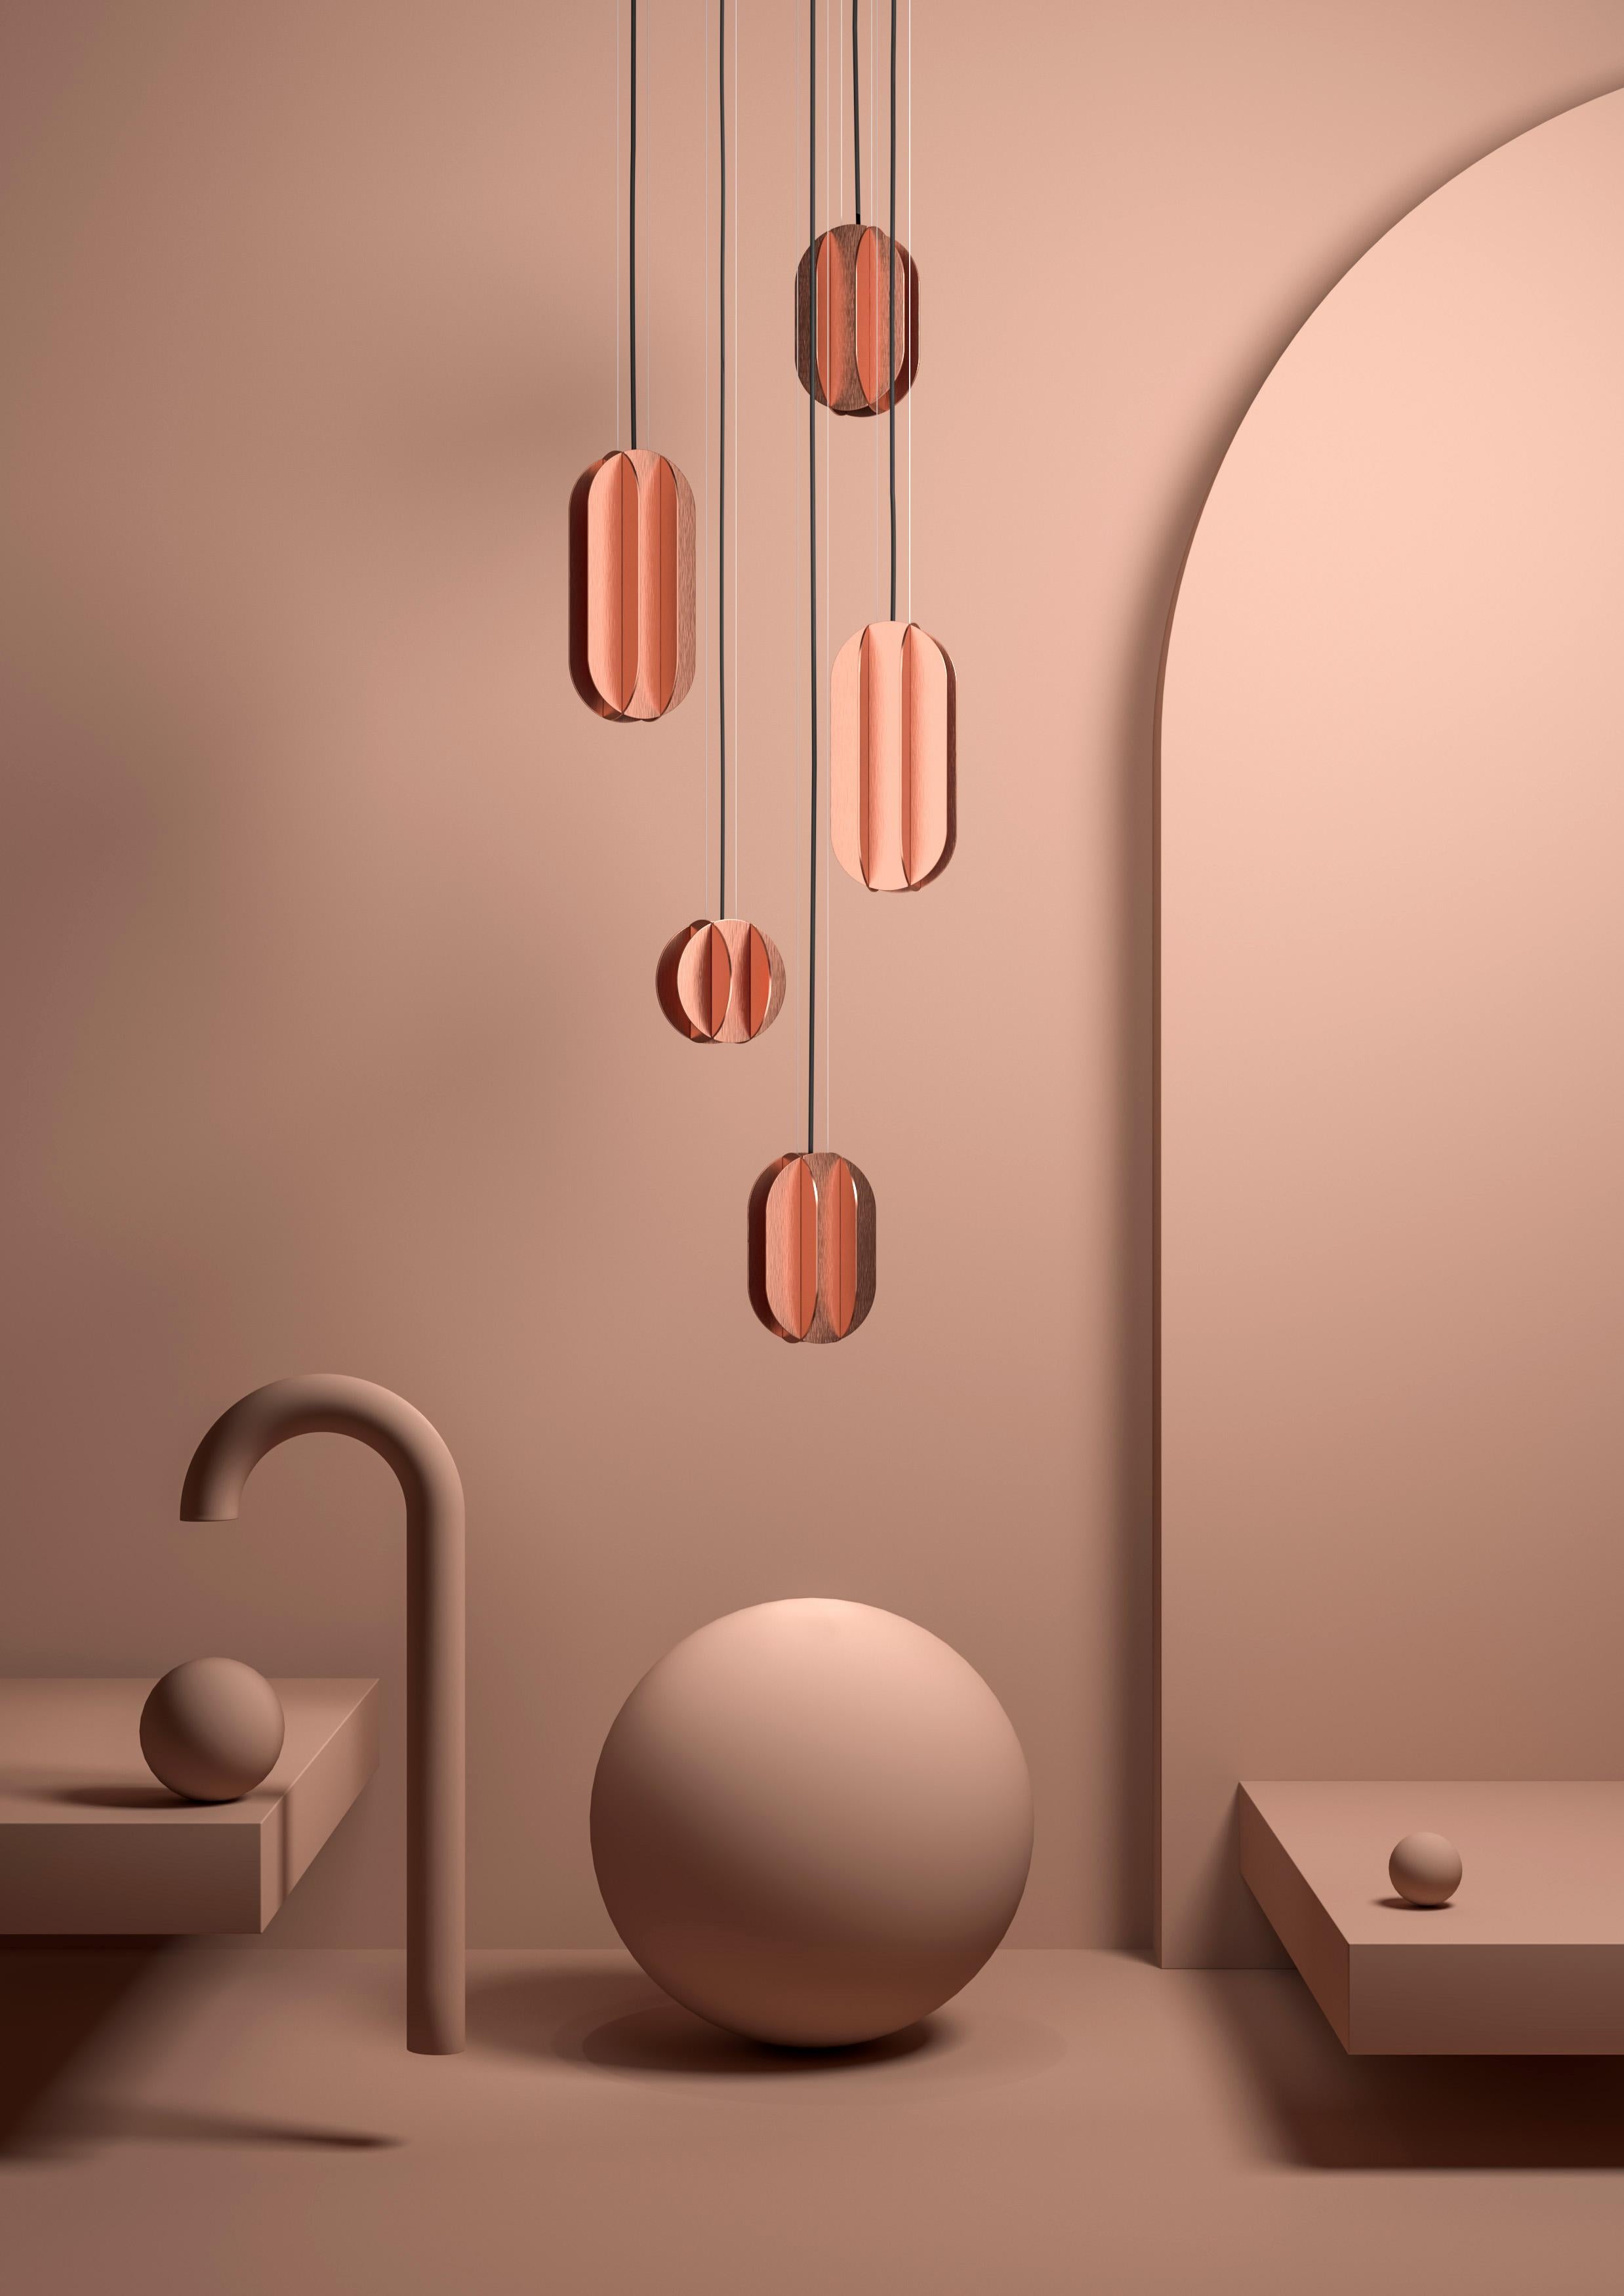 Set of Three Contemporary Pendant Lamp EL Lamps CS2 by NOOM in Copper 2